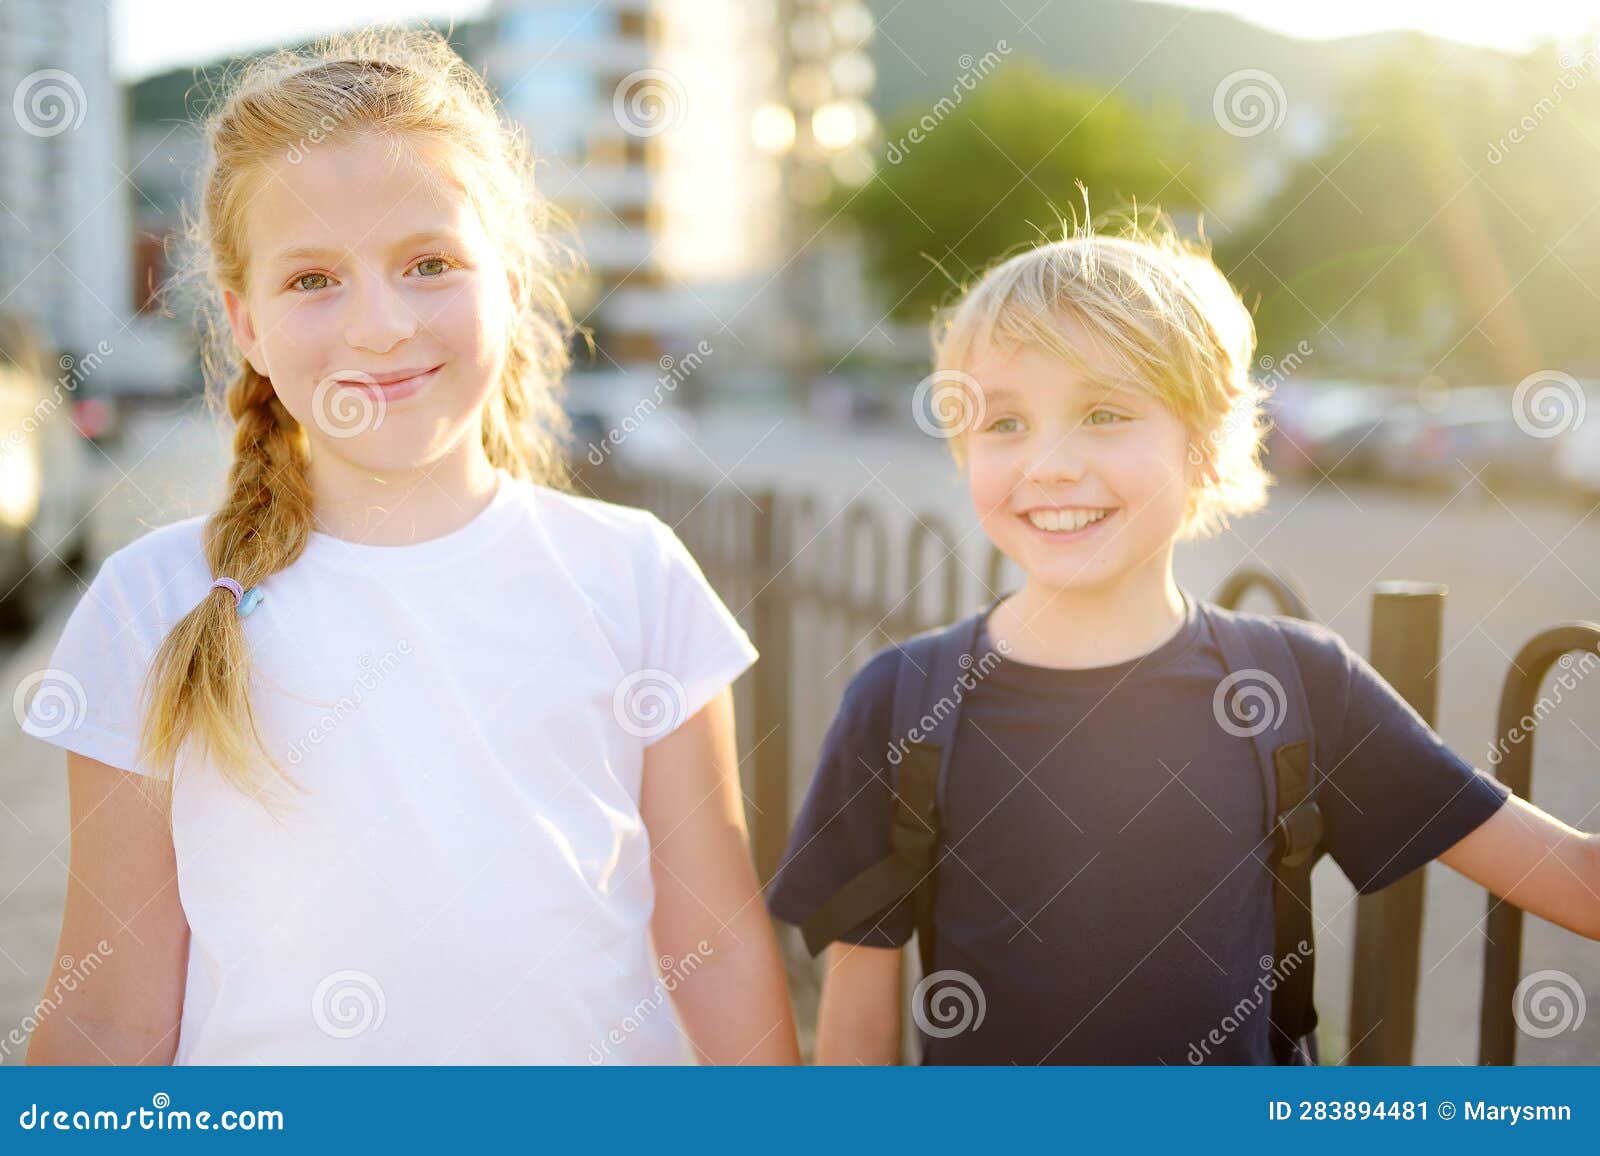 portrait of a happy preteens girl and boy on a city street during a summer sunset. friends are walking together